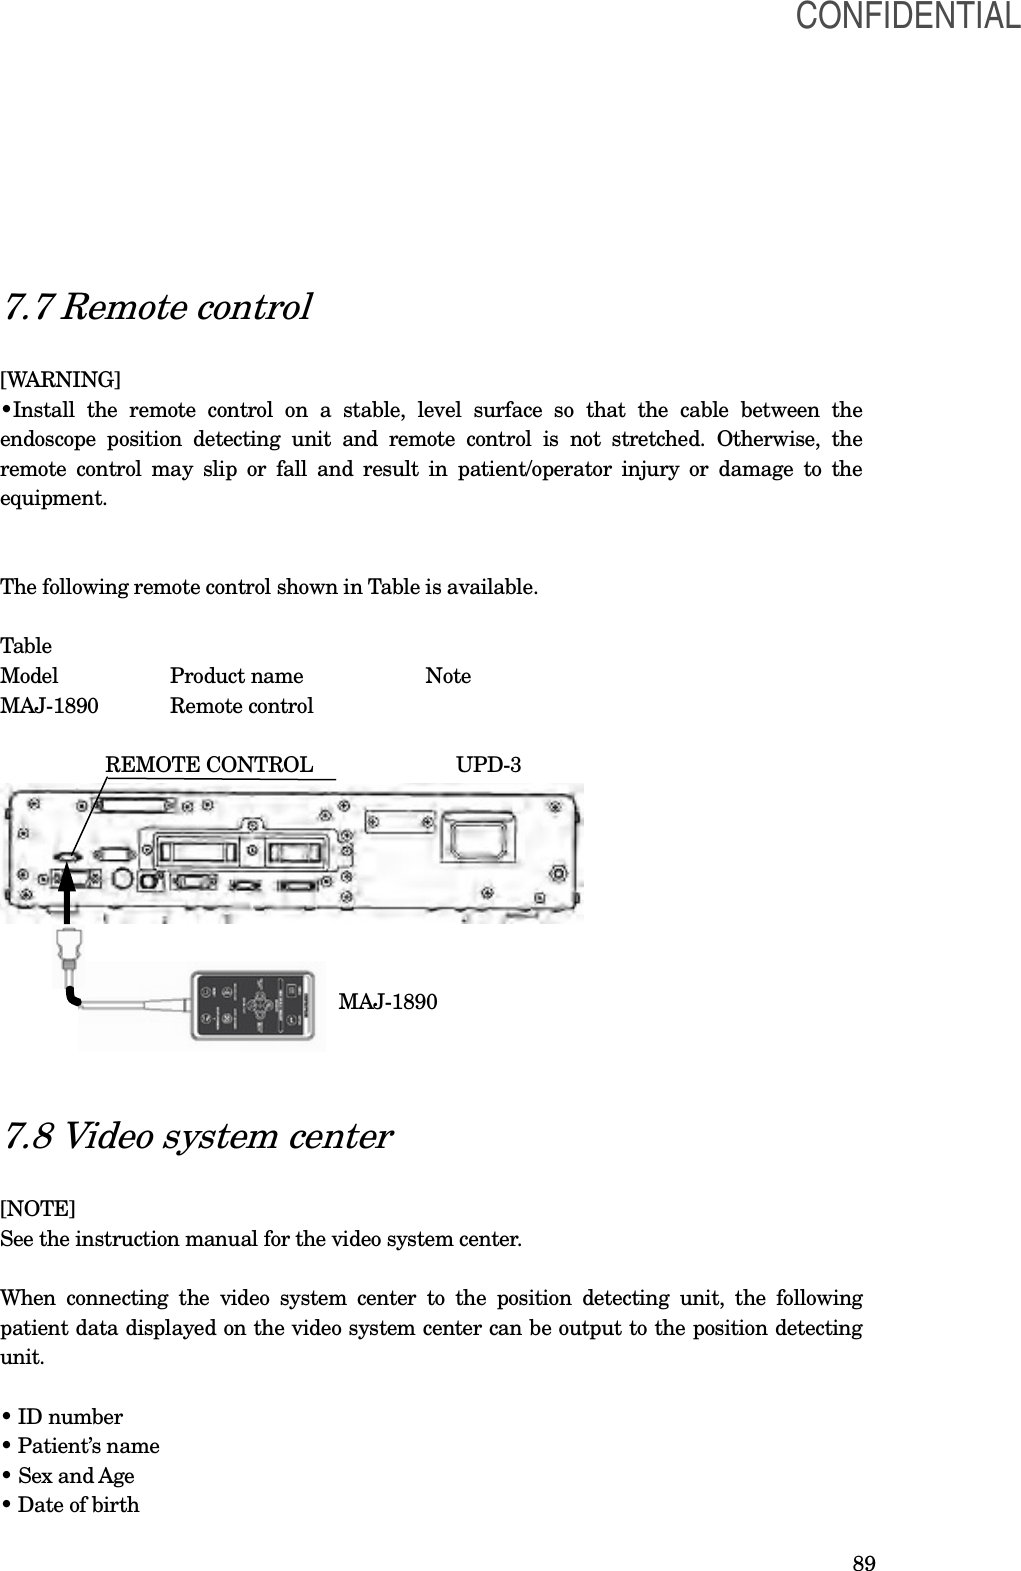  89   7.7 Remote control  [WARNING] •Install  the  remote  control  on  a  stable,  level  surface  so  that  the  cable  between  the endoscope  position  detecting  unit  and  remote  control  is  not  stretched.  Otherwise,  the remote control may  slip  or  fall and result  in  patient/operator injury or  damage to  the equipment.   The following remote control shown in Table is available.  Table Model    Product name      Note   MAJ-1890  Remote control                     REMOTE CONTROL                          UPD-3                                                                    MAJ-1890    7.8 Video system center  [NOTE] See the instruction manual for the video system center.  When  connecting the  video  system  center  to  the  position  detecting  unit,  the  following patient data displayed on the video system center can be output to the position detecting unit.  • ID number • Patient’s name • Sex and Age • Date of birth CONFIDENTIAL